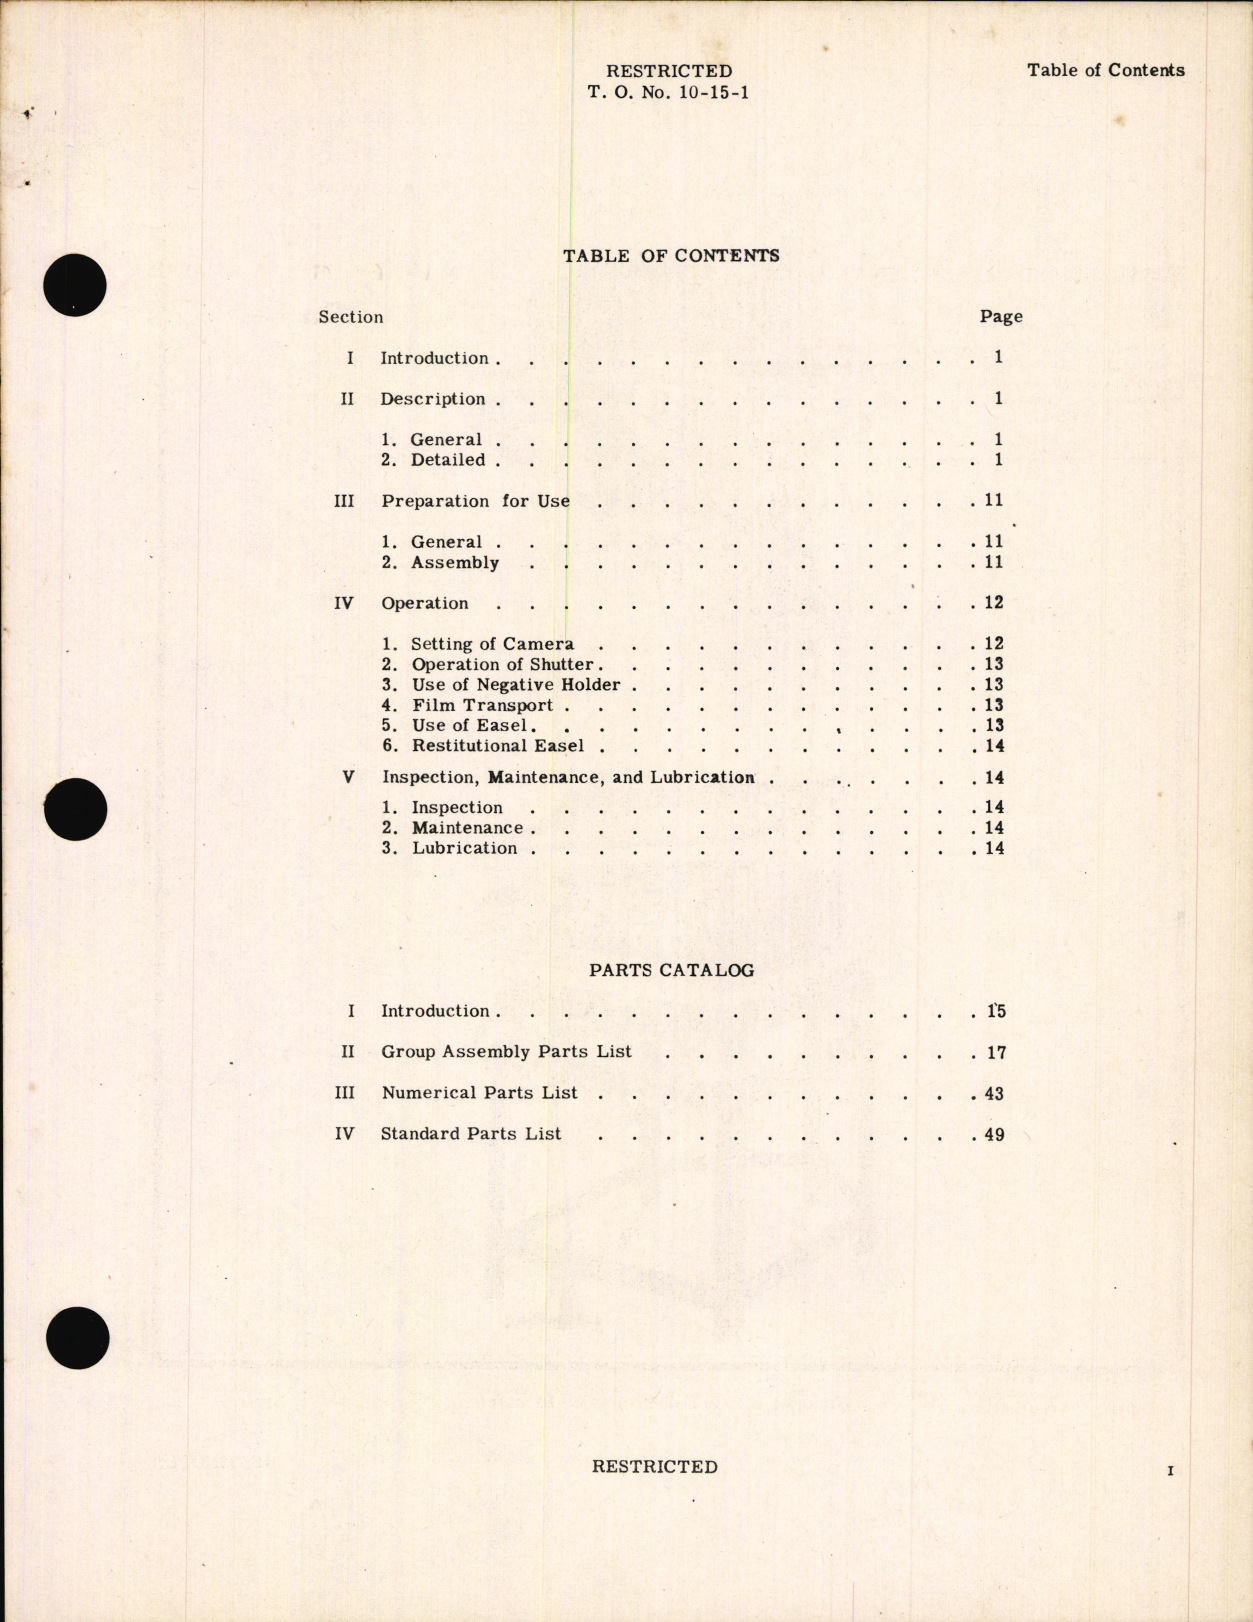 Sample page 1 from AirCorps Library document: Handbook of Instructions with Parts Catalog for Type B-9 Projection Printer